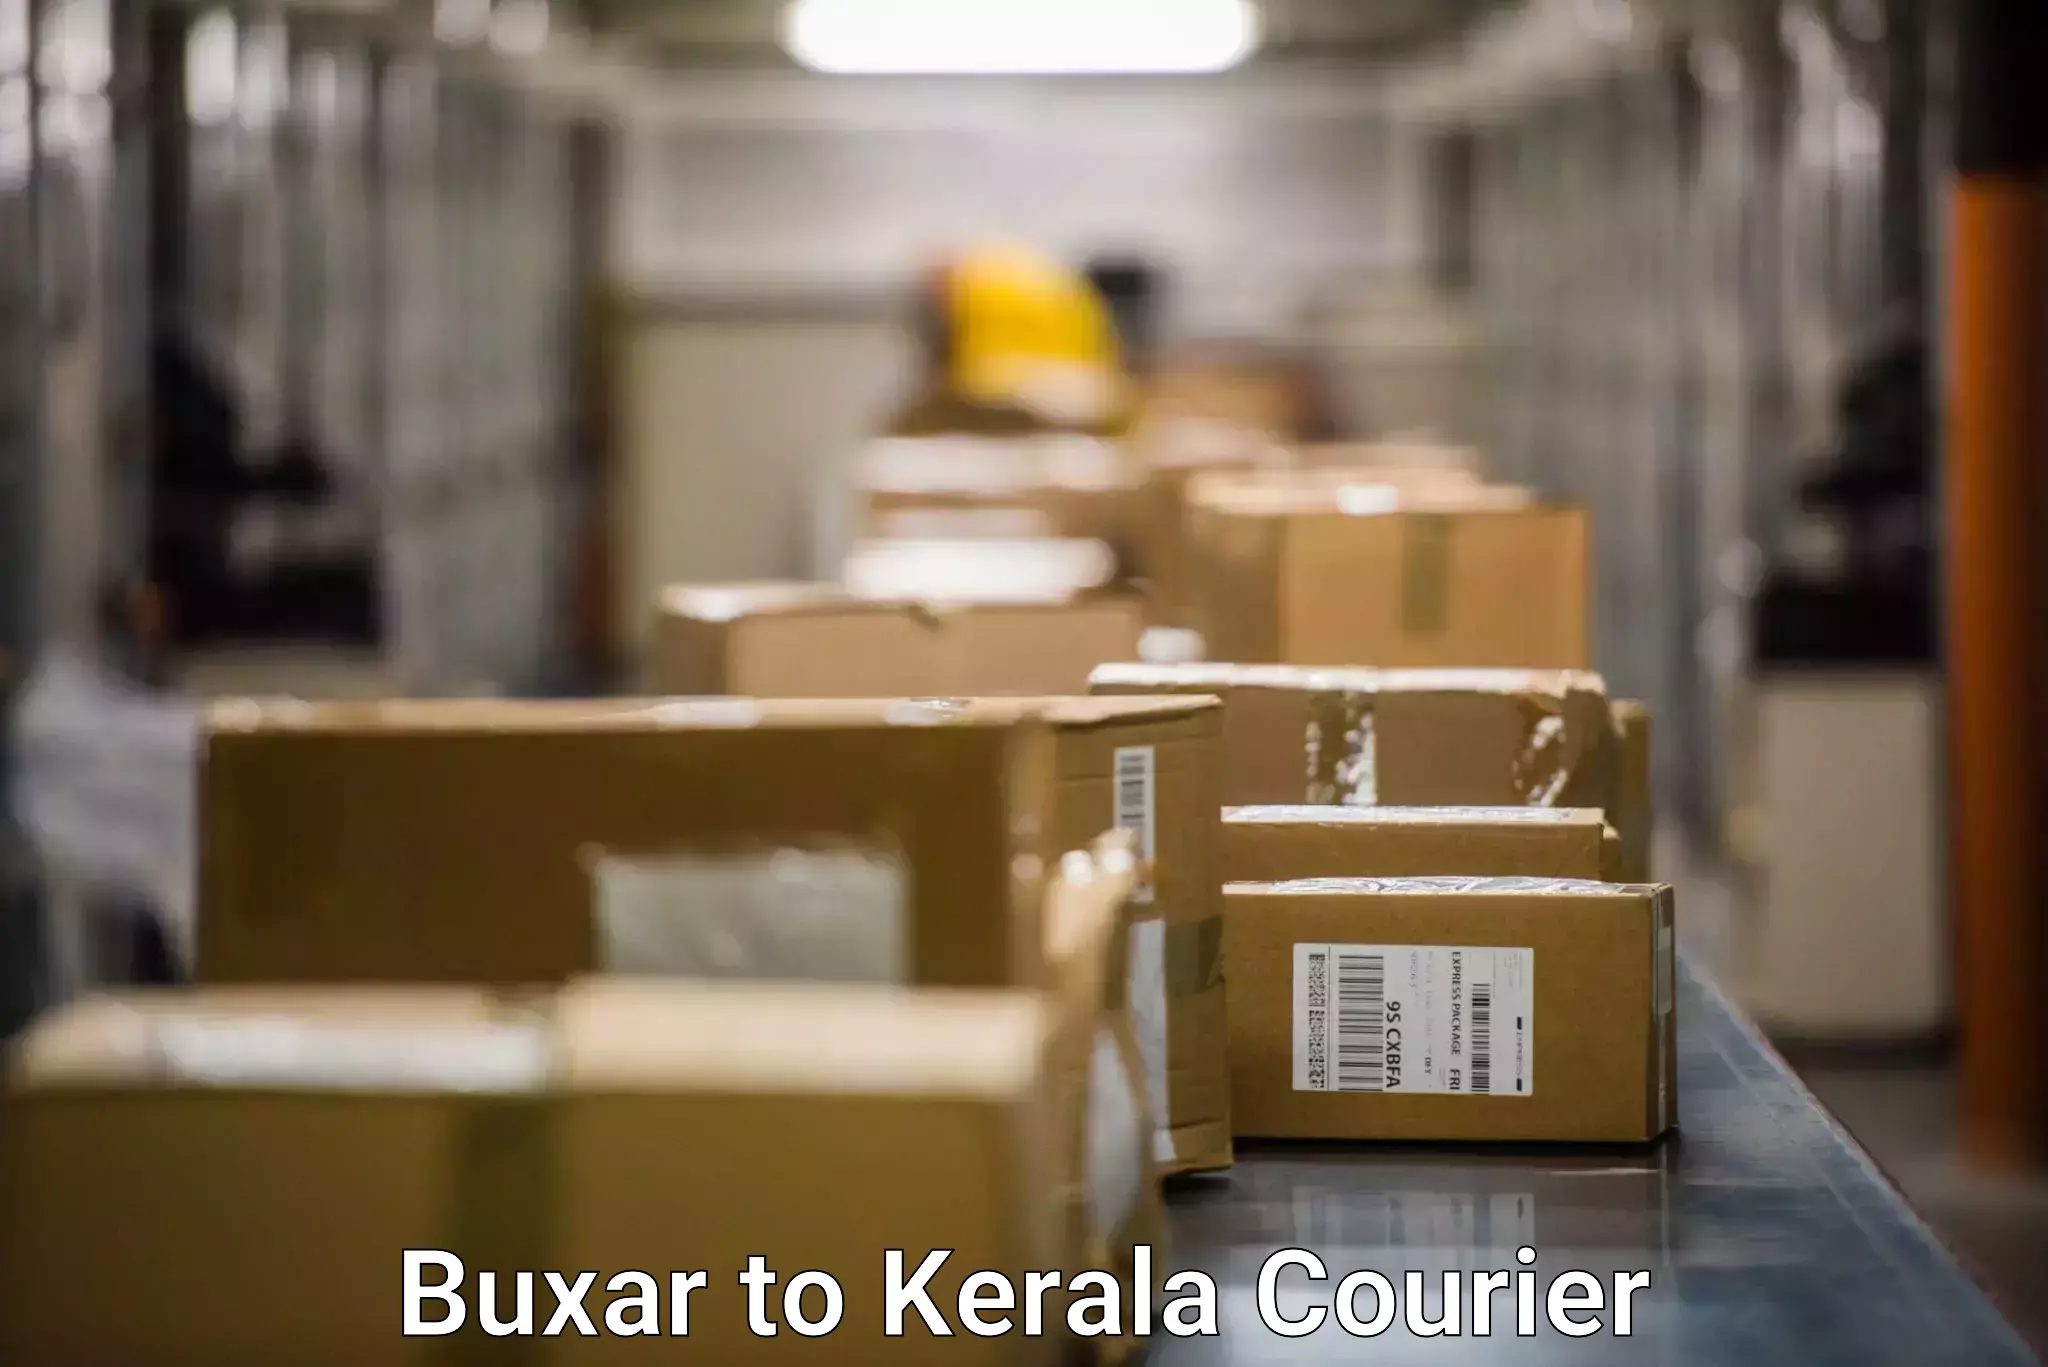 Express package services Buxar to Trivandrum